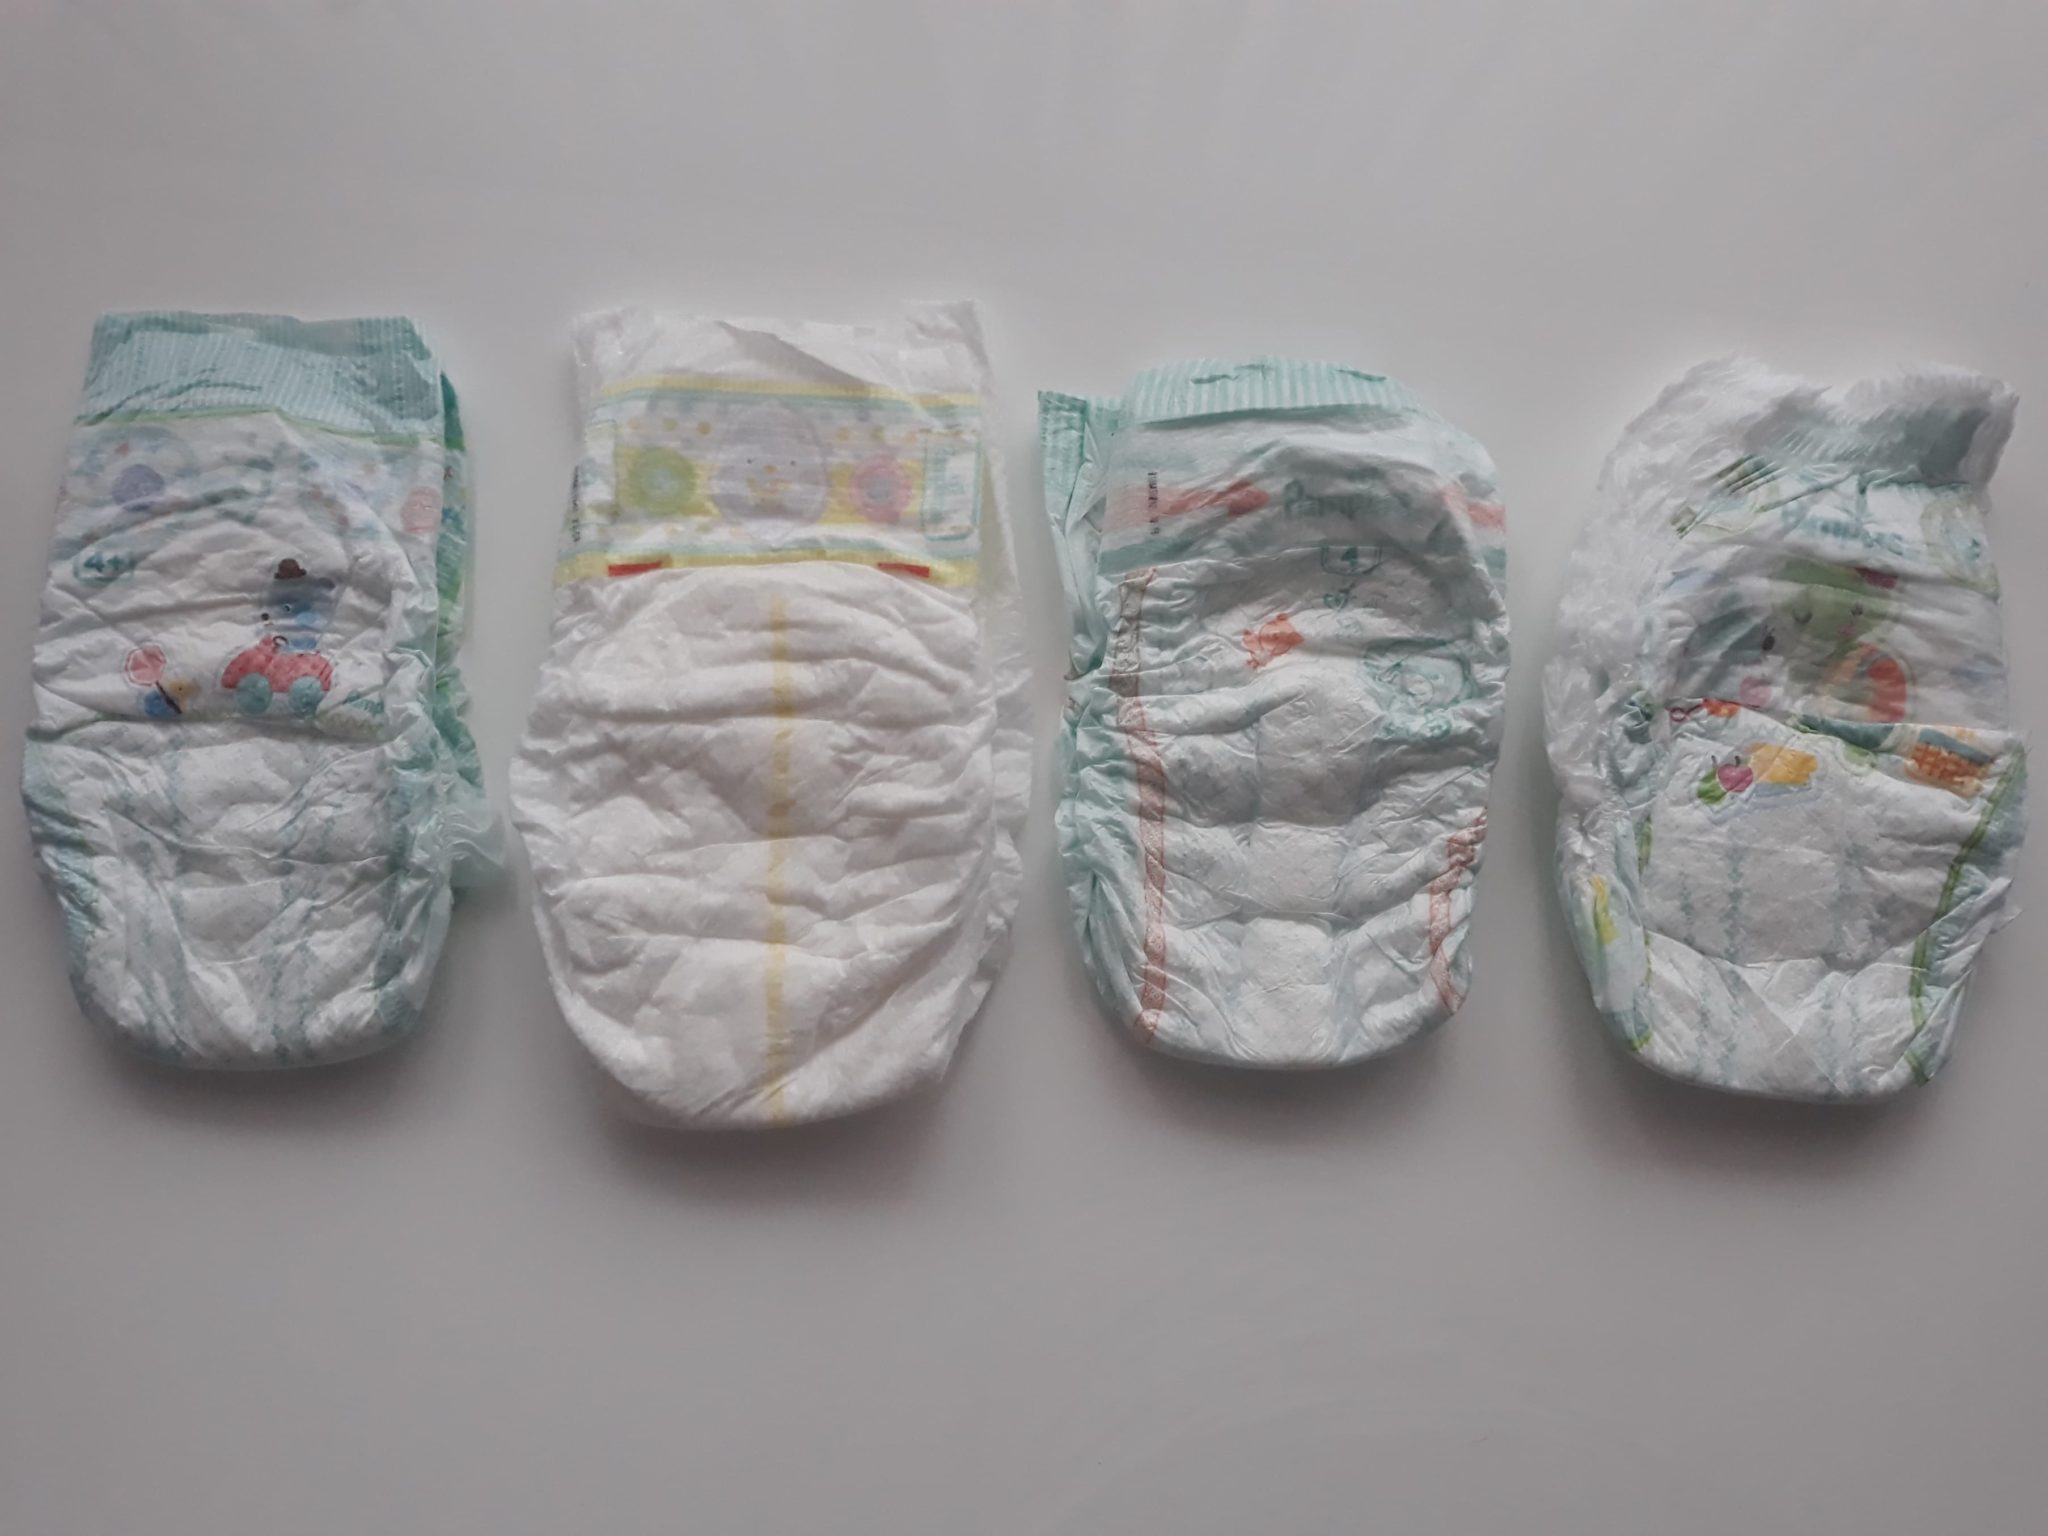 pampers pro care 1 pielucha 38szt